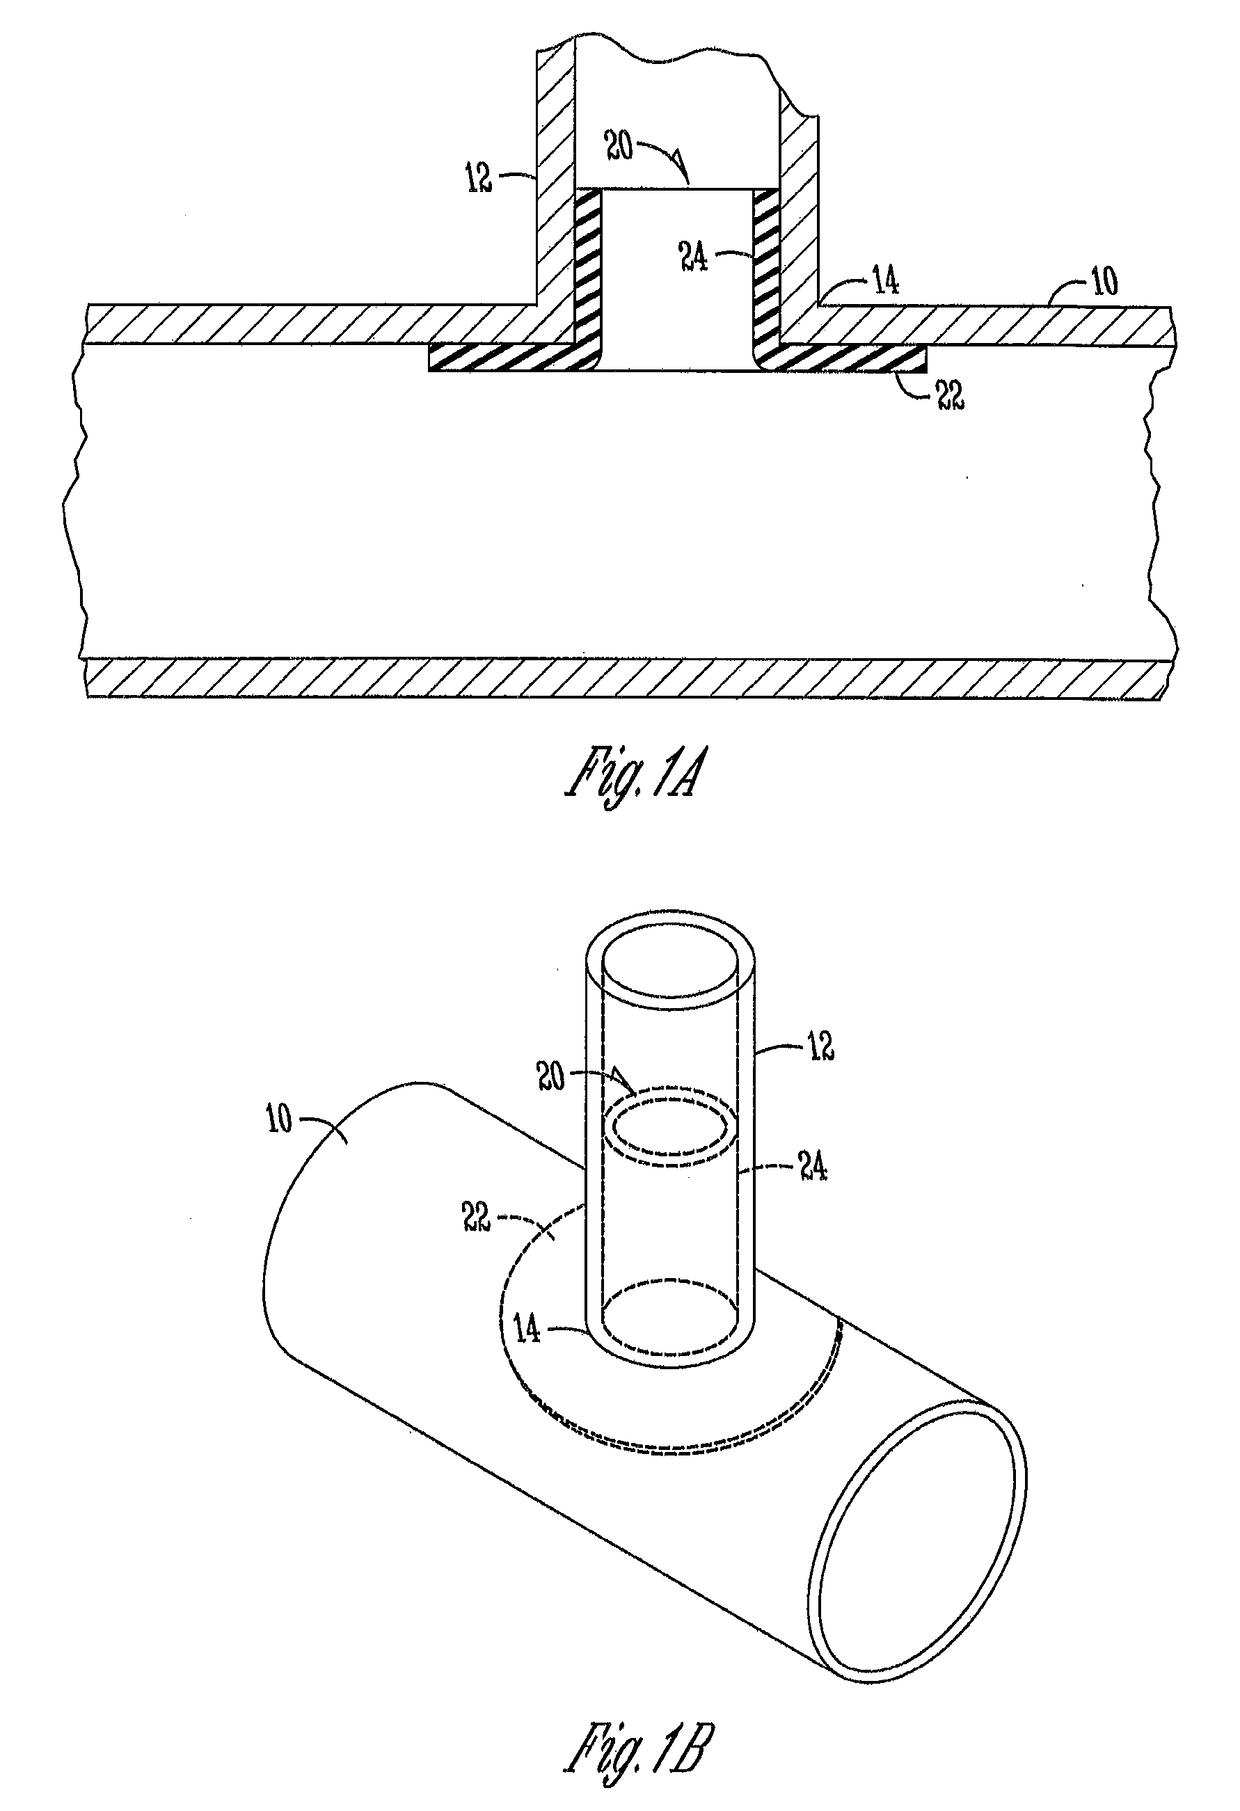 Method and apparatus for repairing a pipe junction